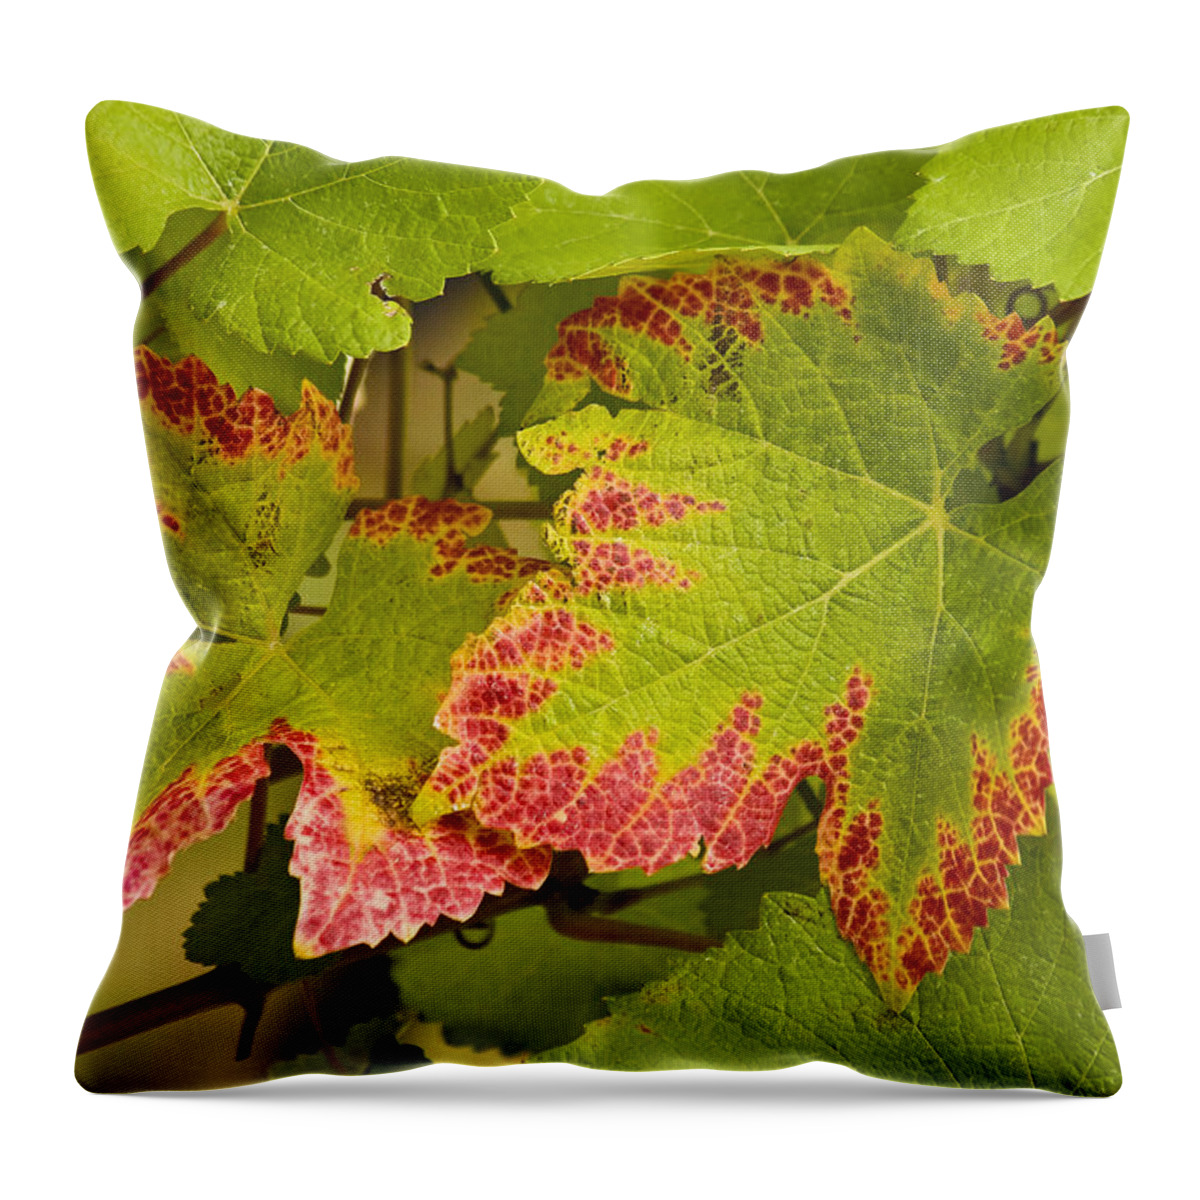 Vineyard Throw Pillow featuring the photograph Leaf Design by Jean Noren